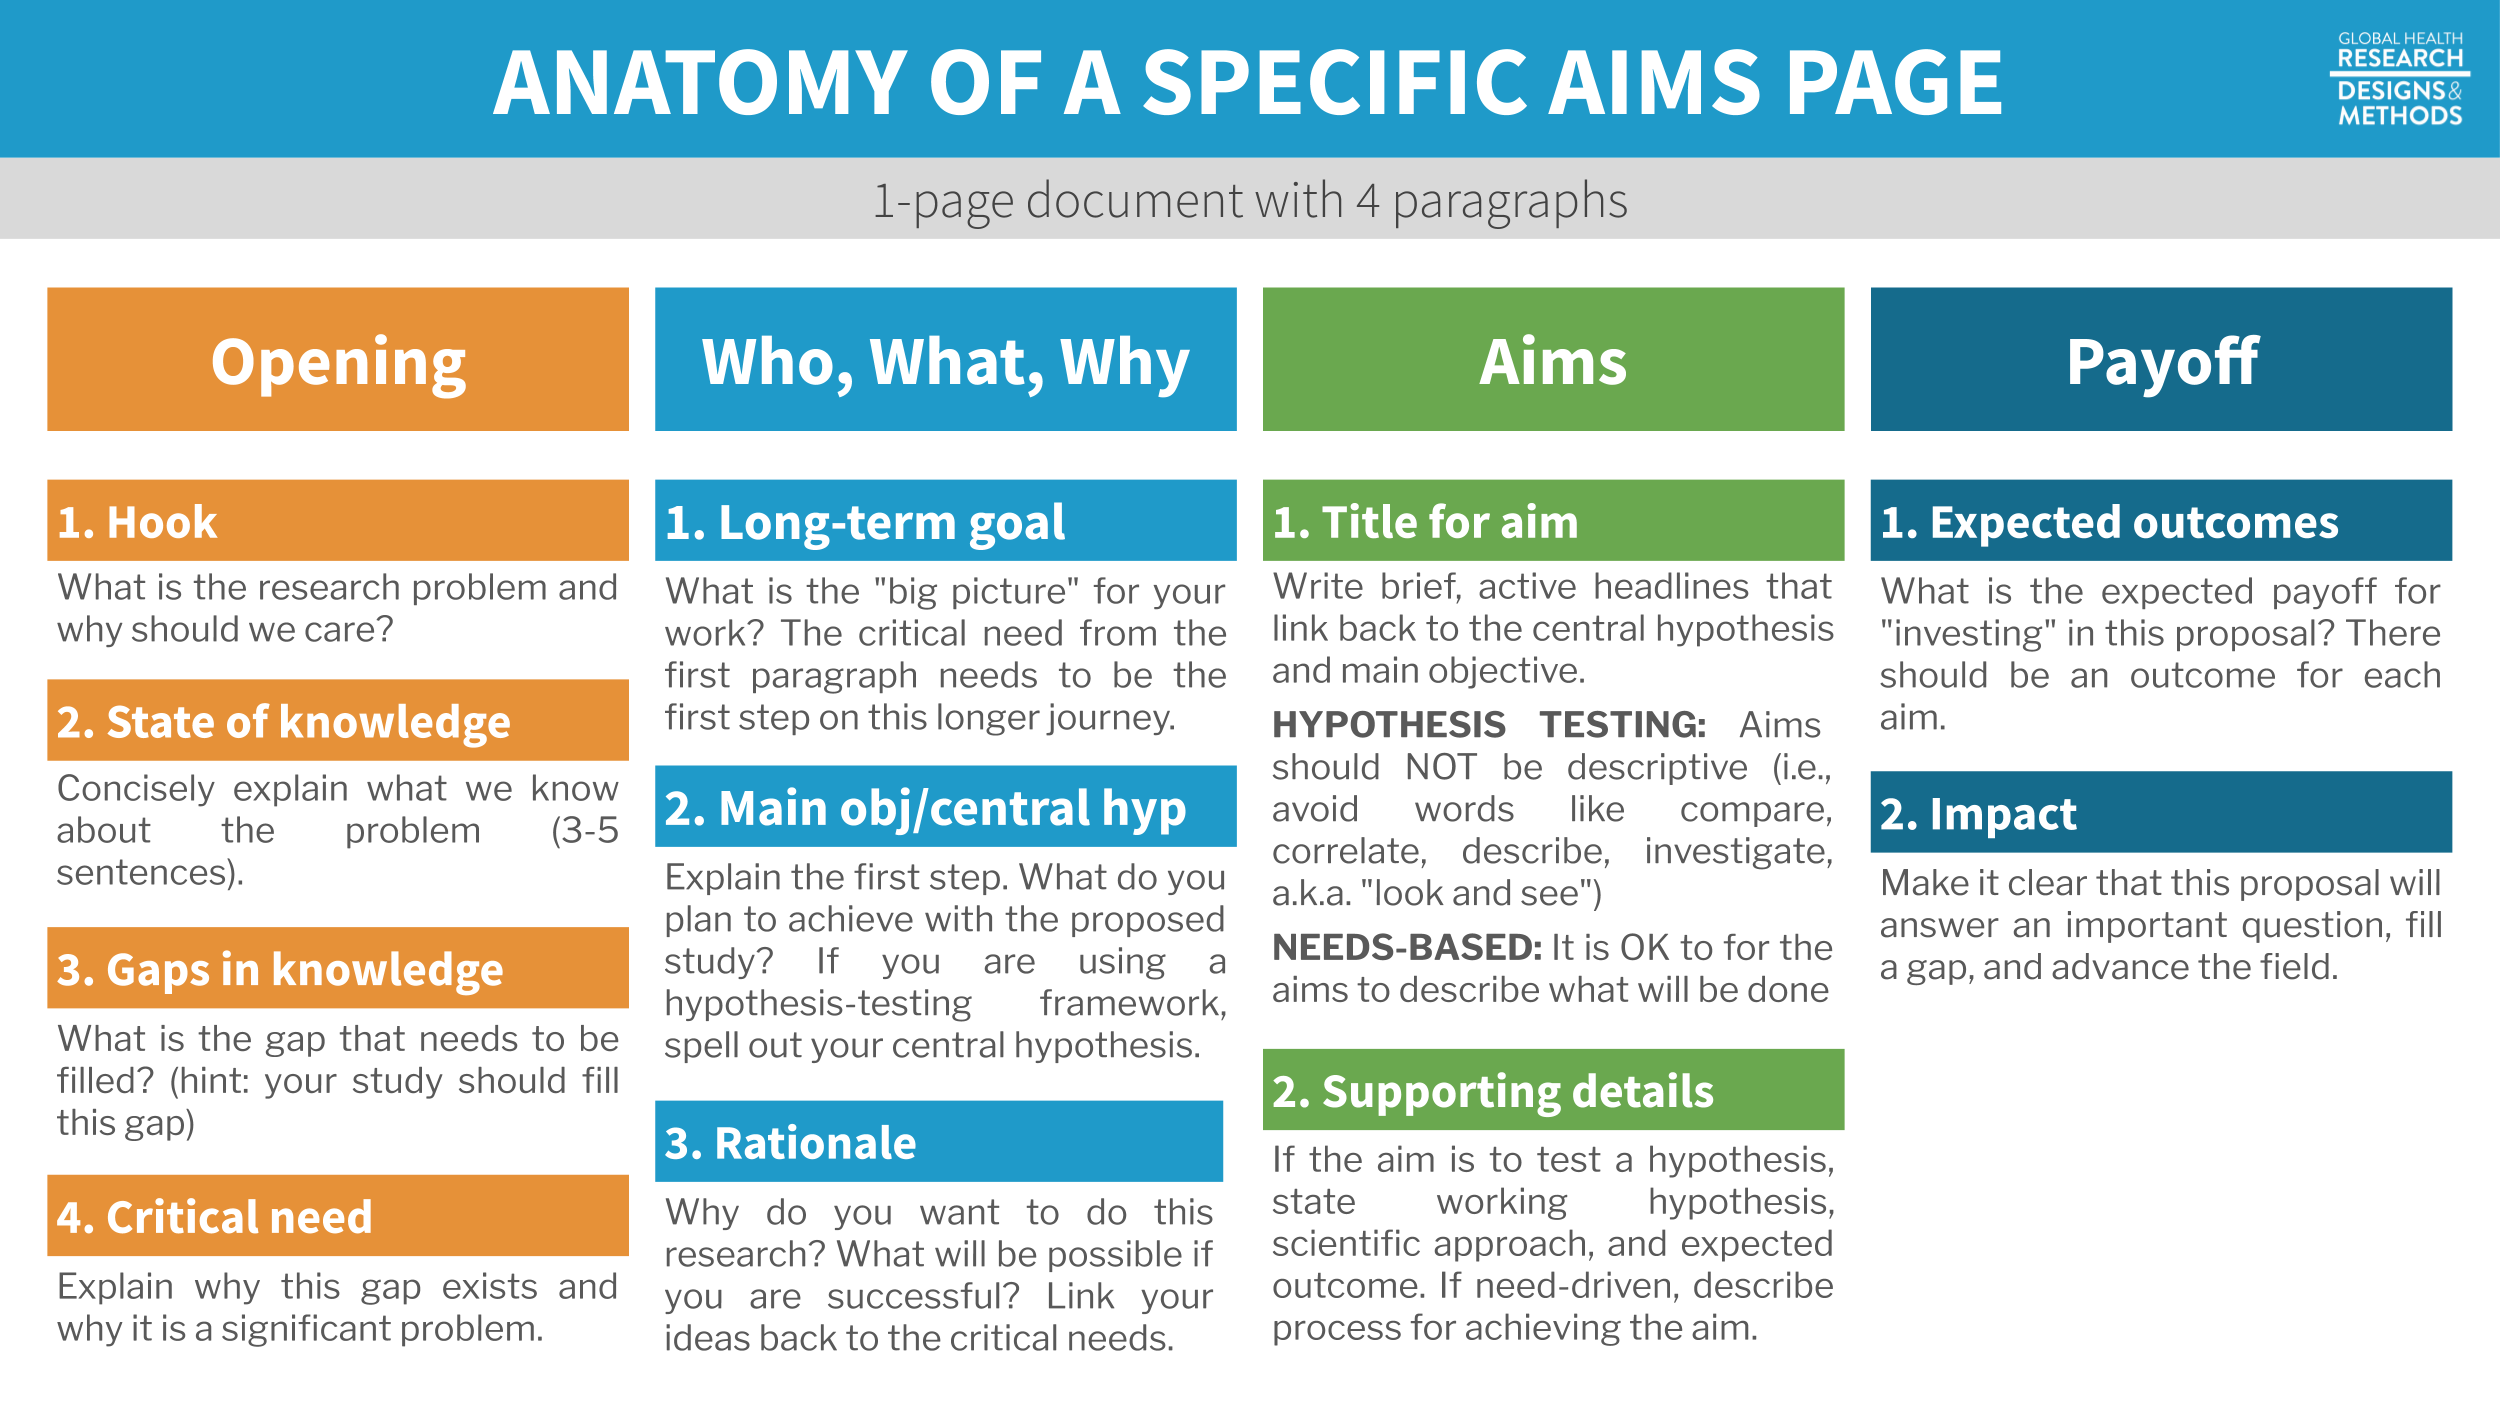 Anatomy of a specific aims page. Source: Inspired by @sneck2015. To view a full resolution version of this figure, visit [https://tinyurl.com/y5s35jo5](https://tinyurl.com/y5s35jo5).